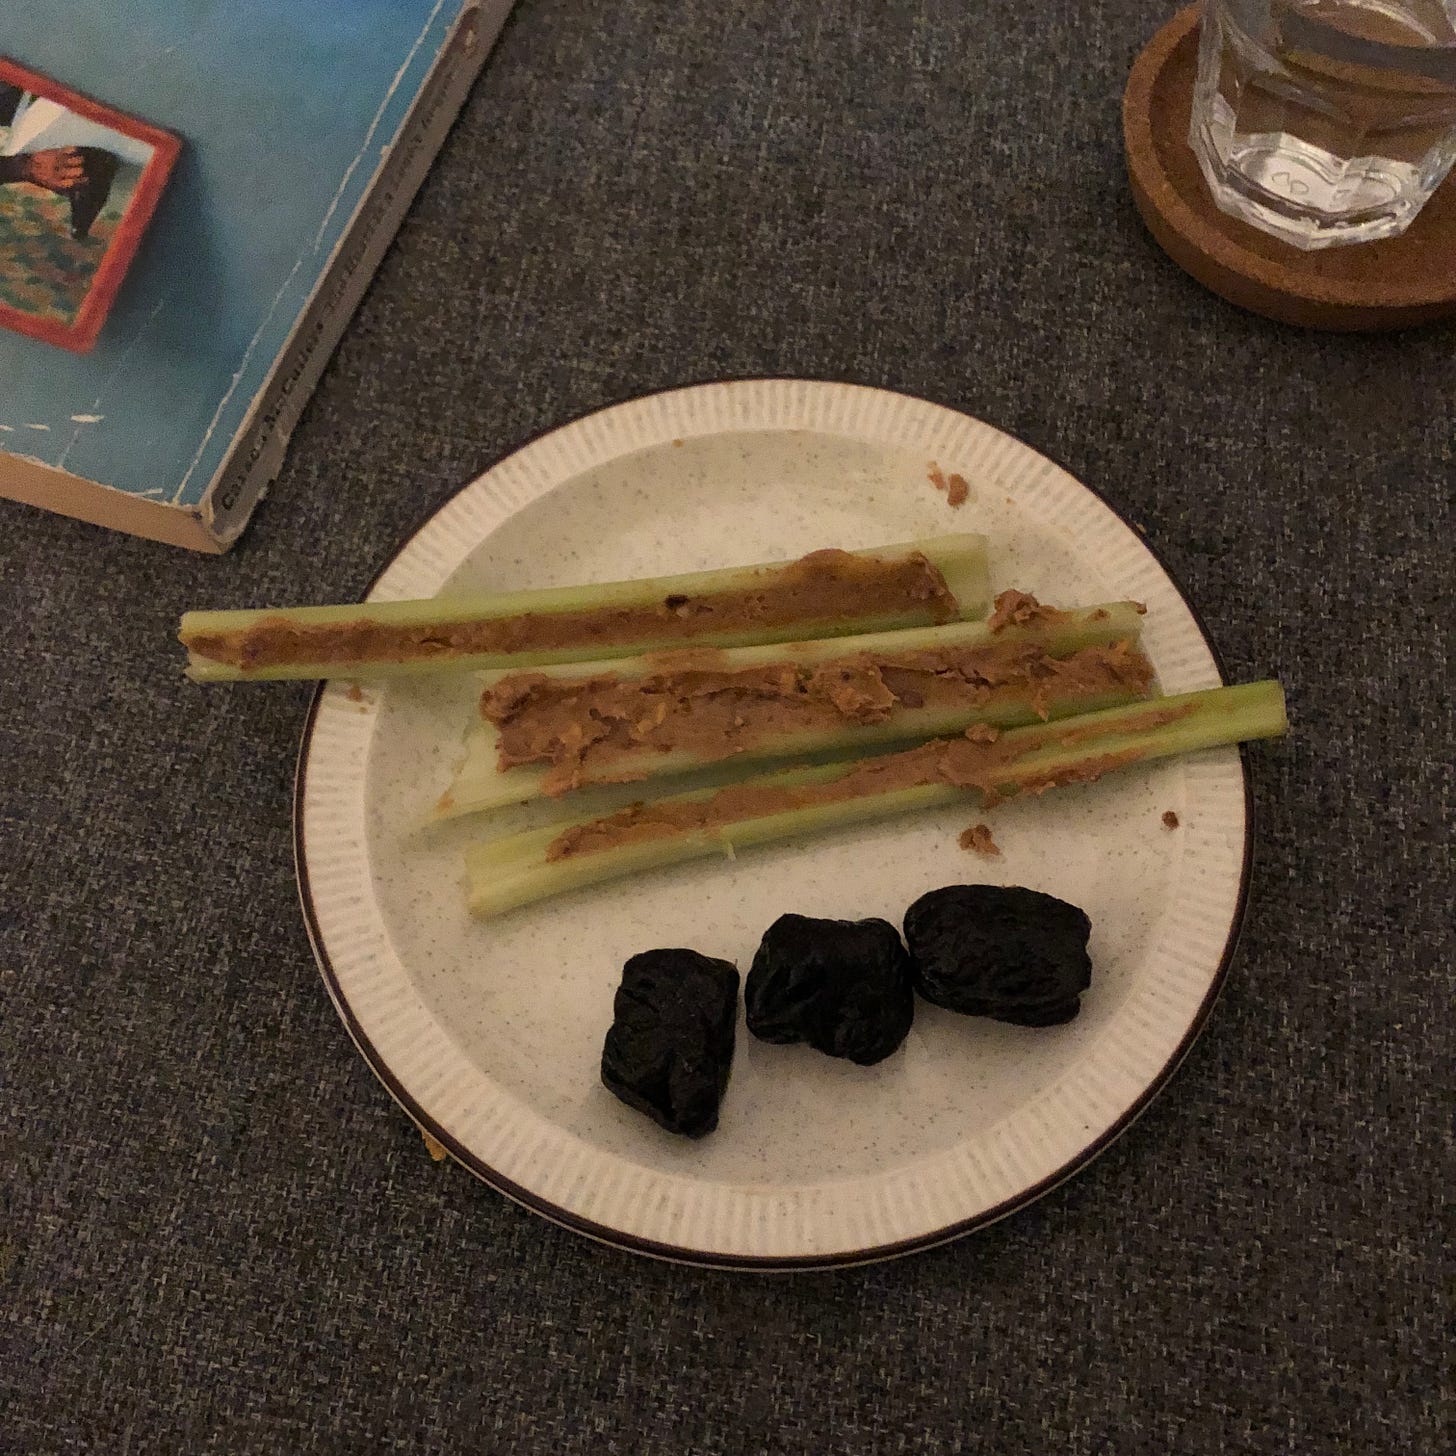 A small plate with three lengths of celery, with peanut butter spread into their channels, and three dark wrinkly prunes. Beside this, the edge of a book and a glass of water on a cork coaster. 